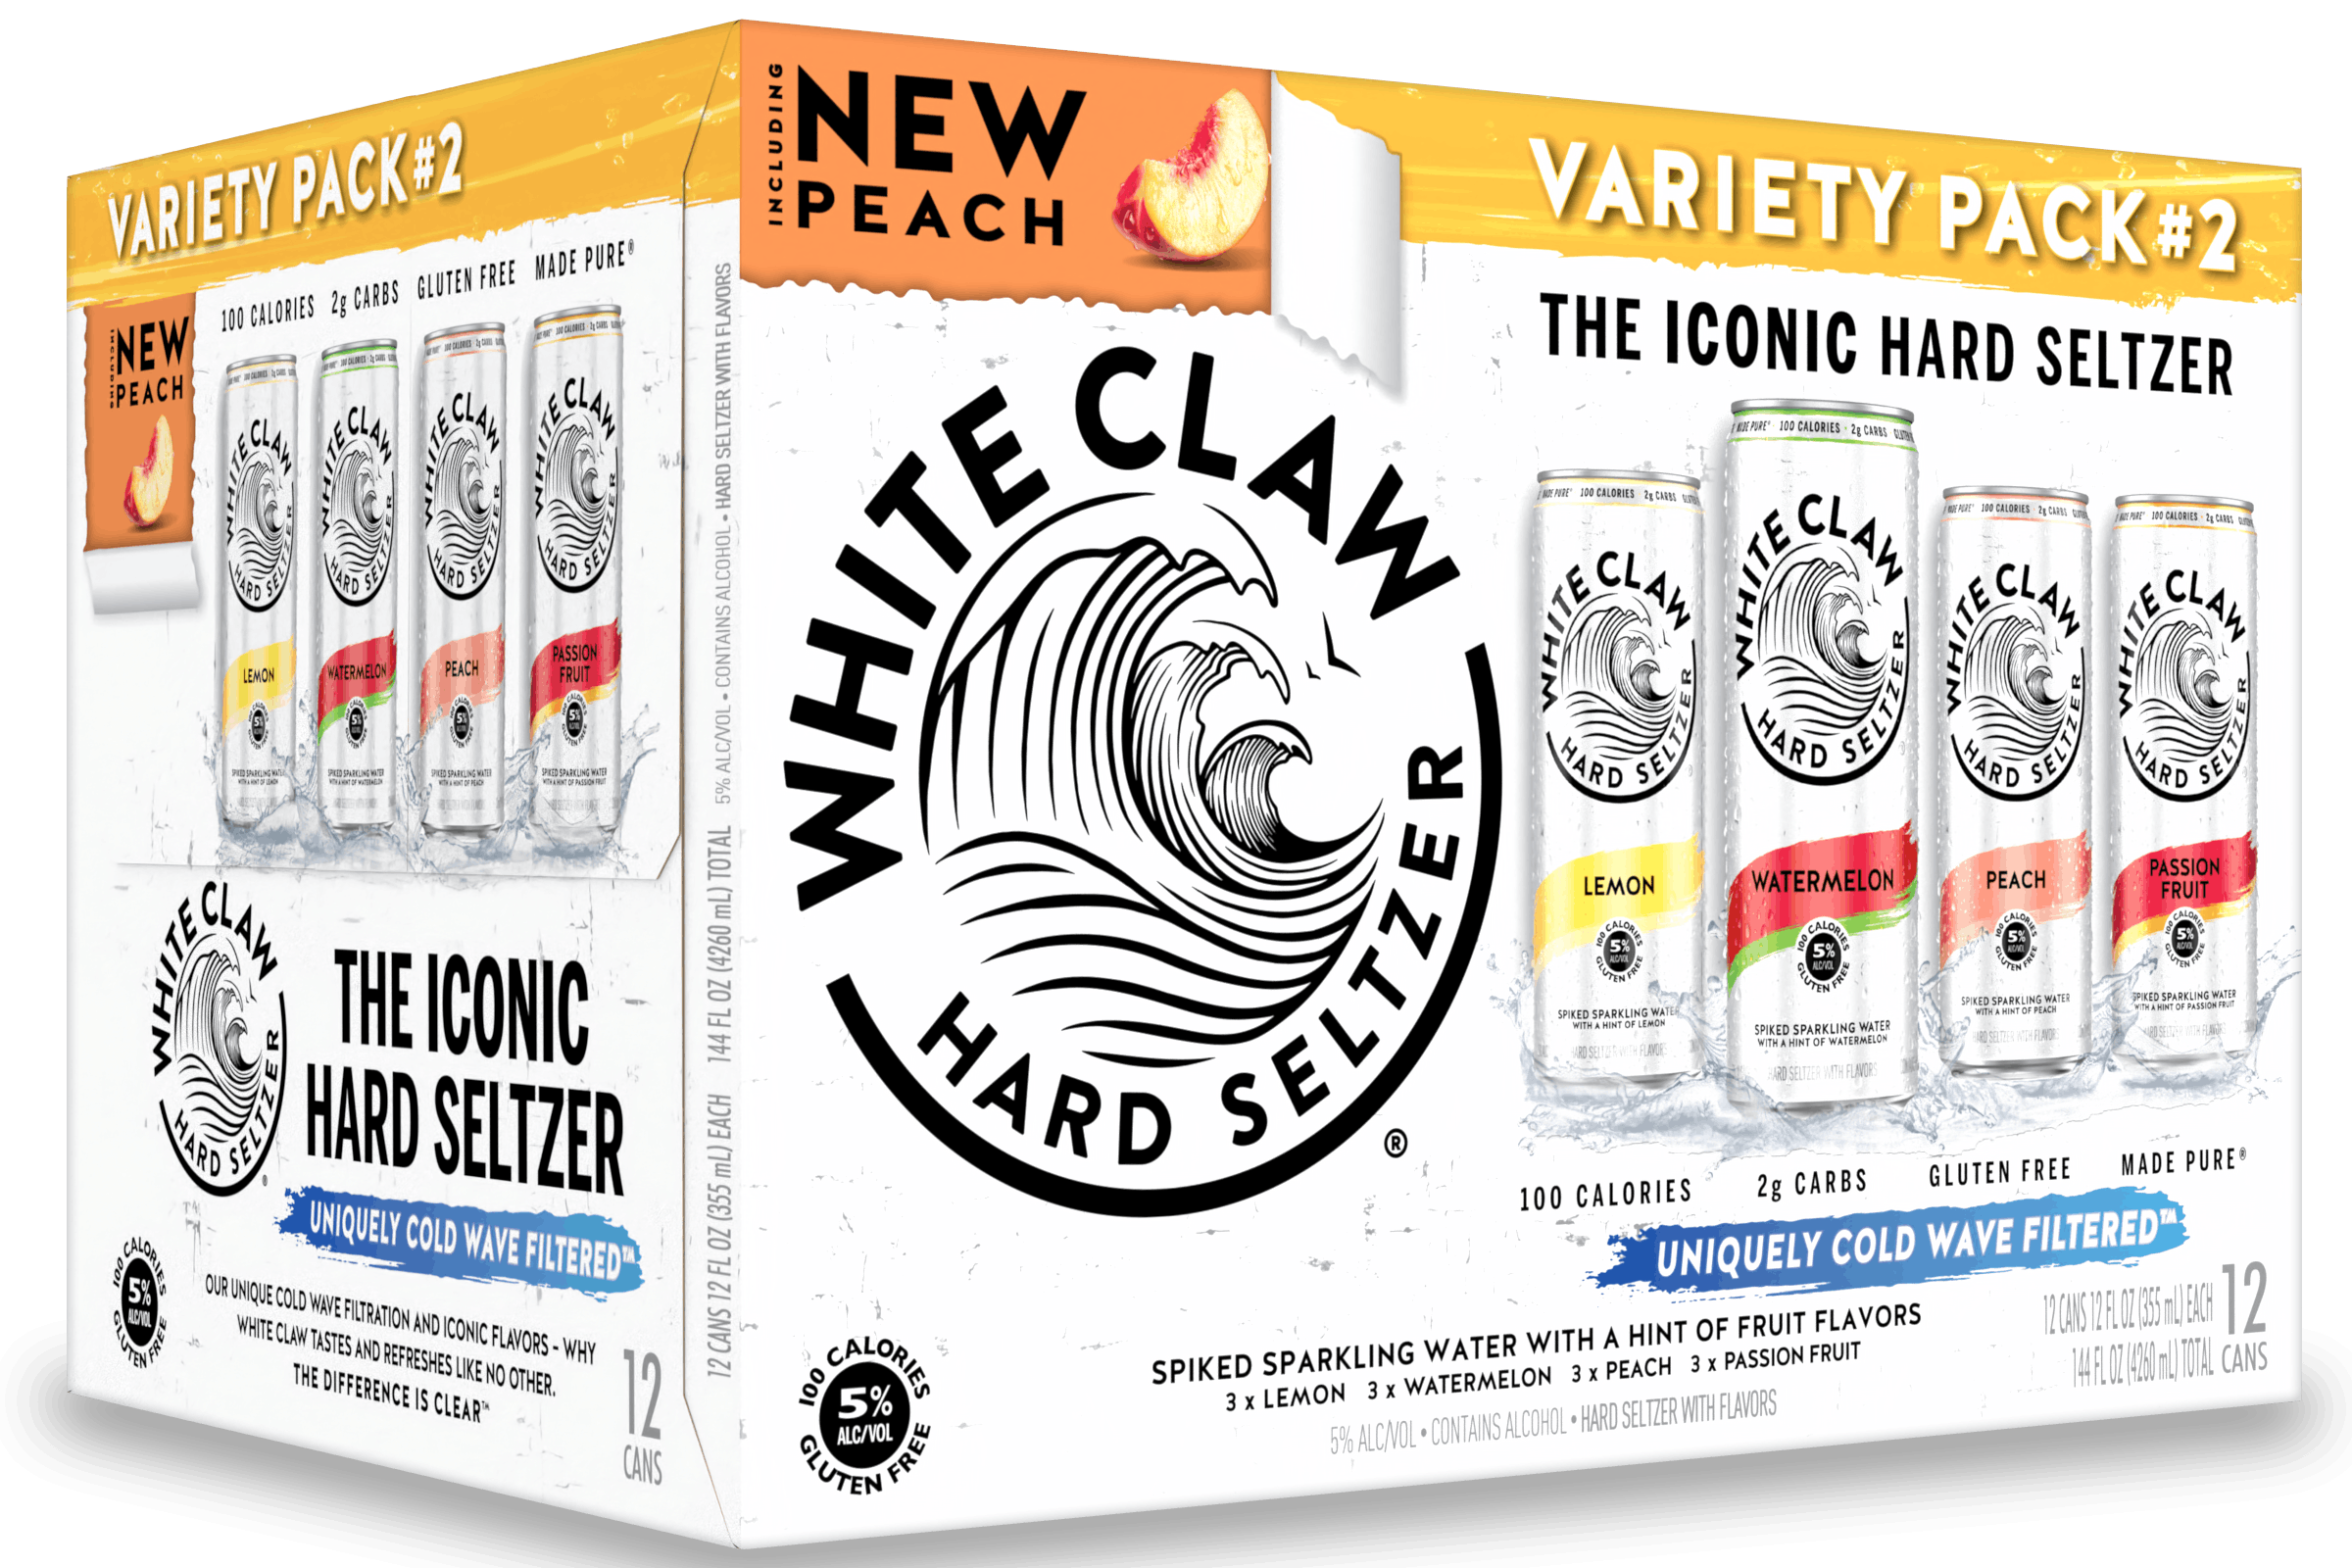 Variety Pack No 2 of White Claw® Hard Seltzer sits on rocks in front of the sea.